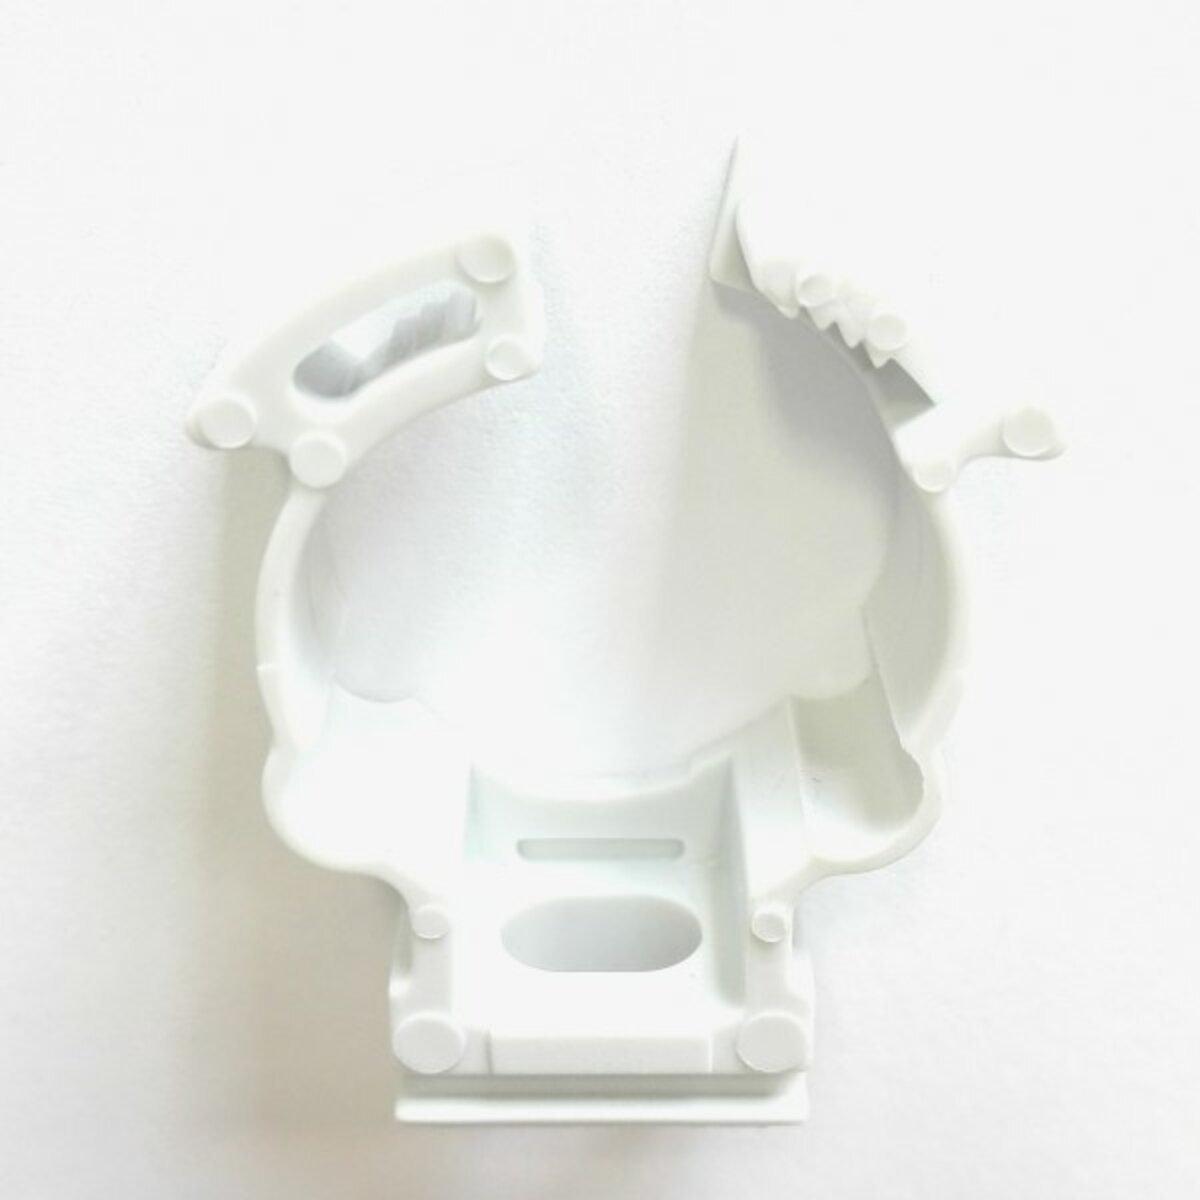 Condensate pipe fixing clip ø 20 mm for air conditioners